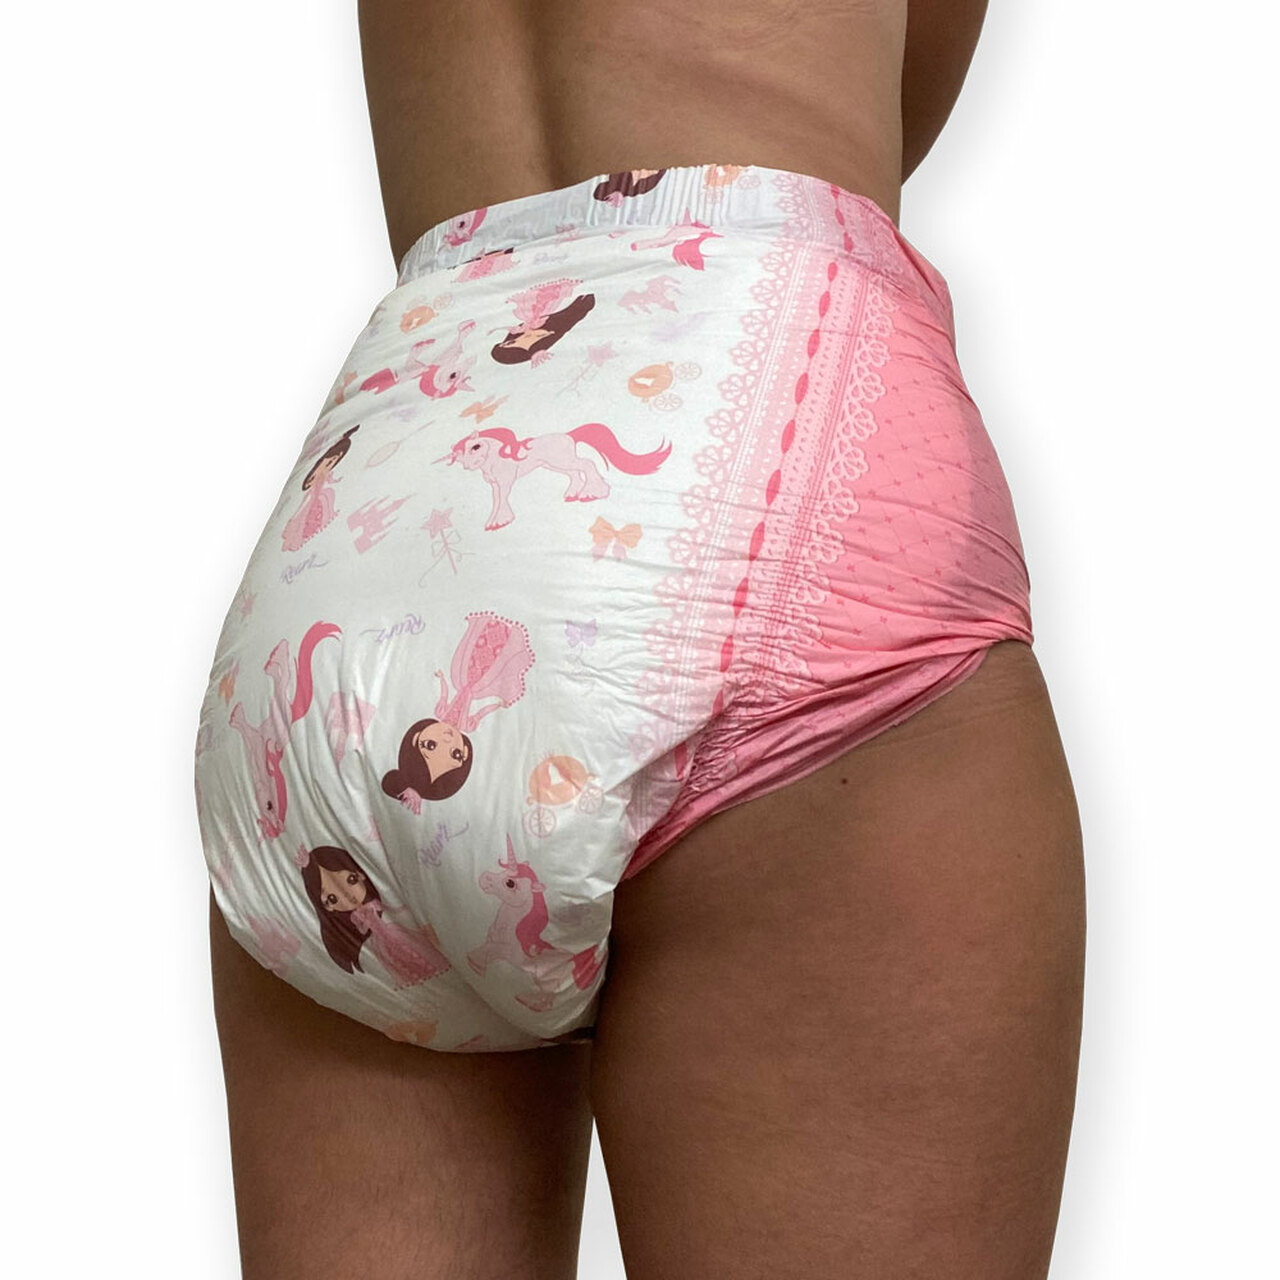 bubles devere add women in baby diapers tumblr photo